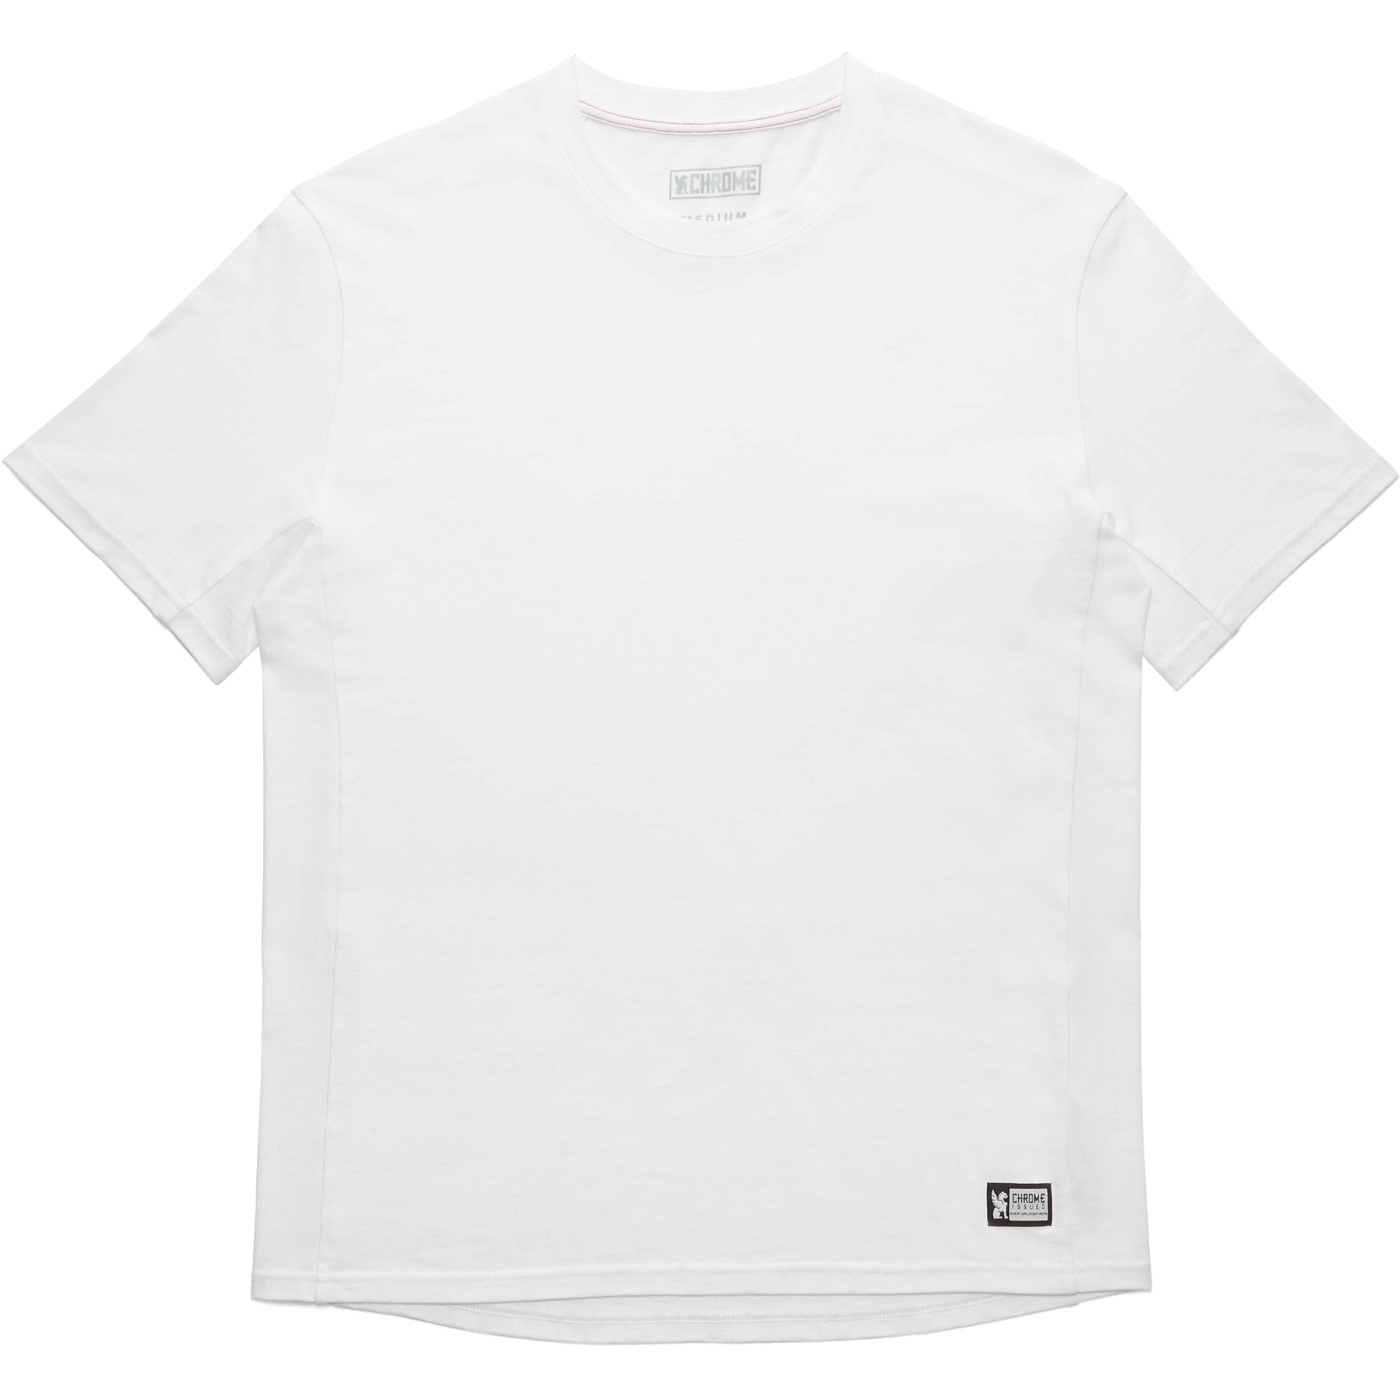 Productfoto van CHROME Issued Short Sleeve Tee - White